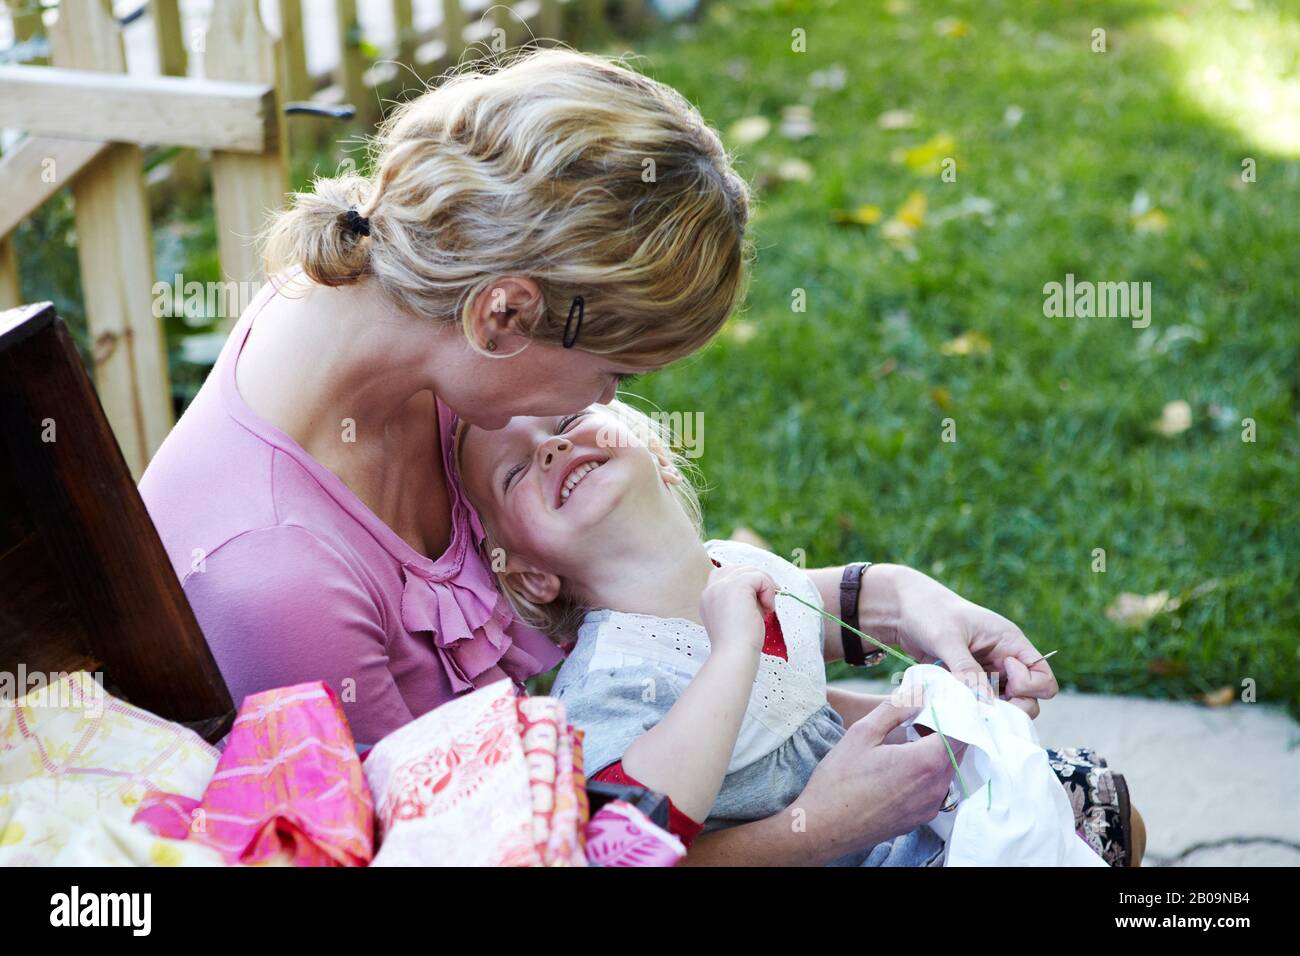 mother and daughter sewing and laughing Stock Photo